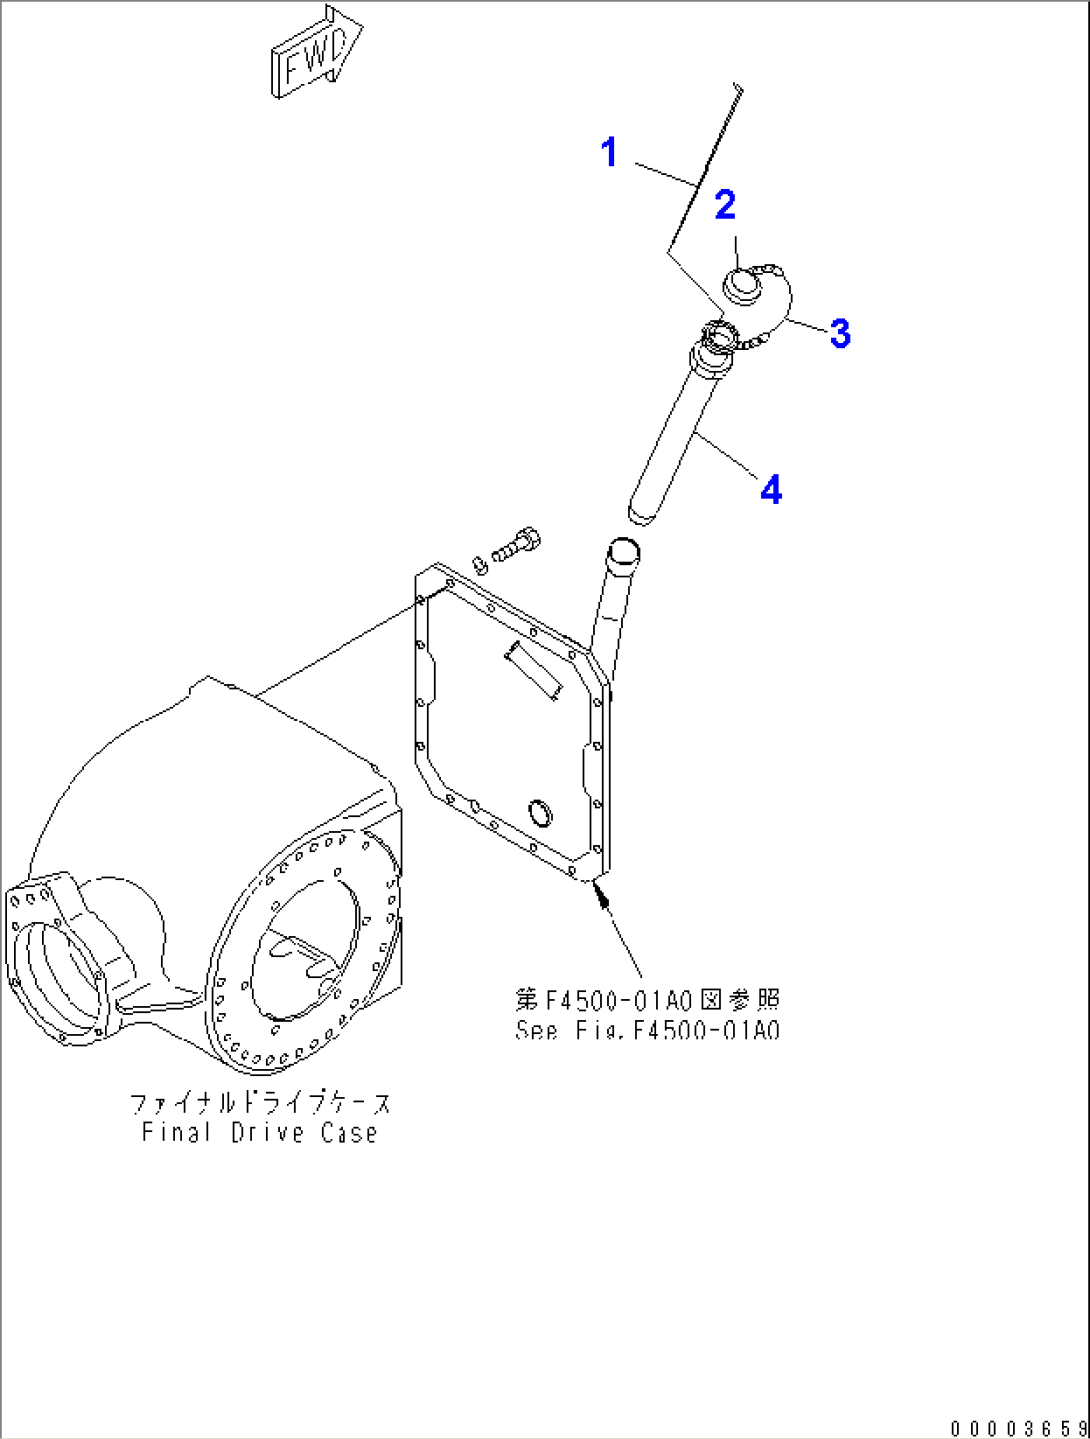 REAR AXLE (FINAL DRIVE) (FILLER TUBE) (NO SPIN DIFFERENTIAL)(#.-)